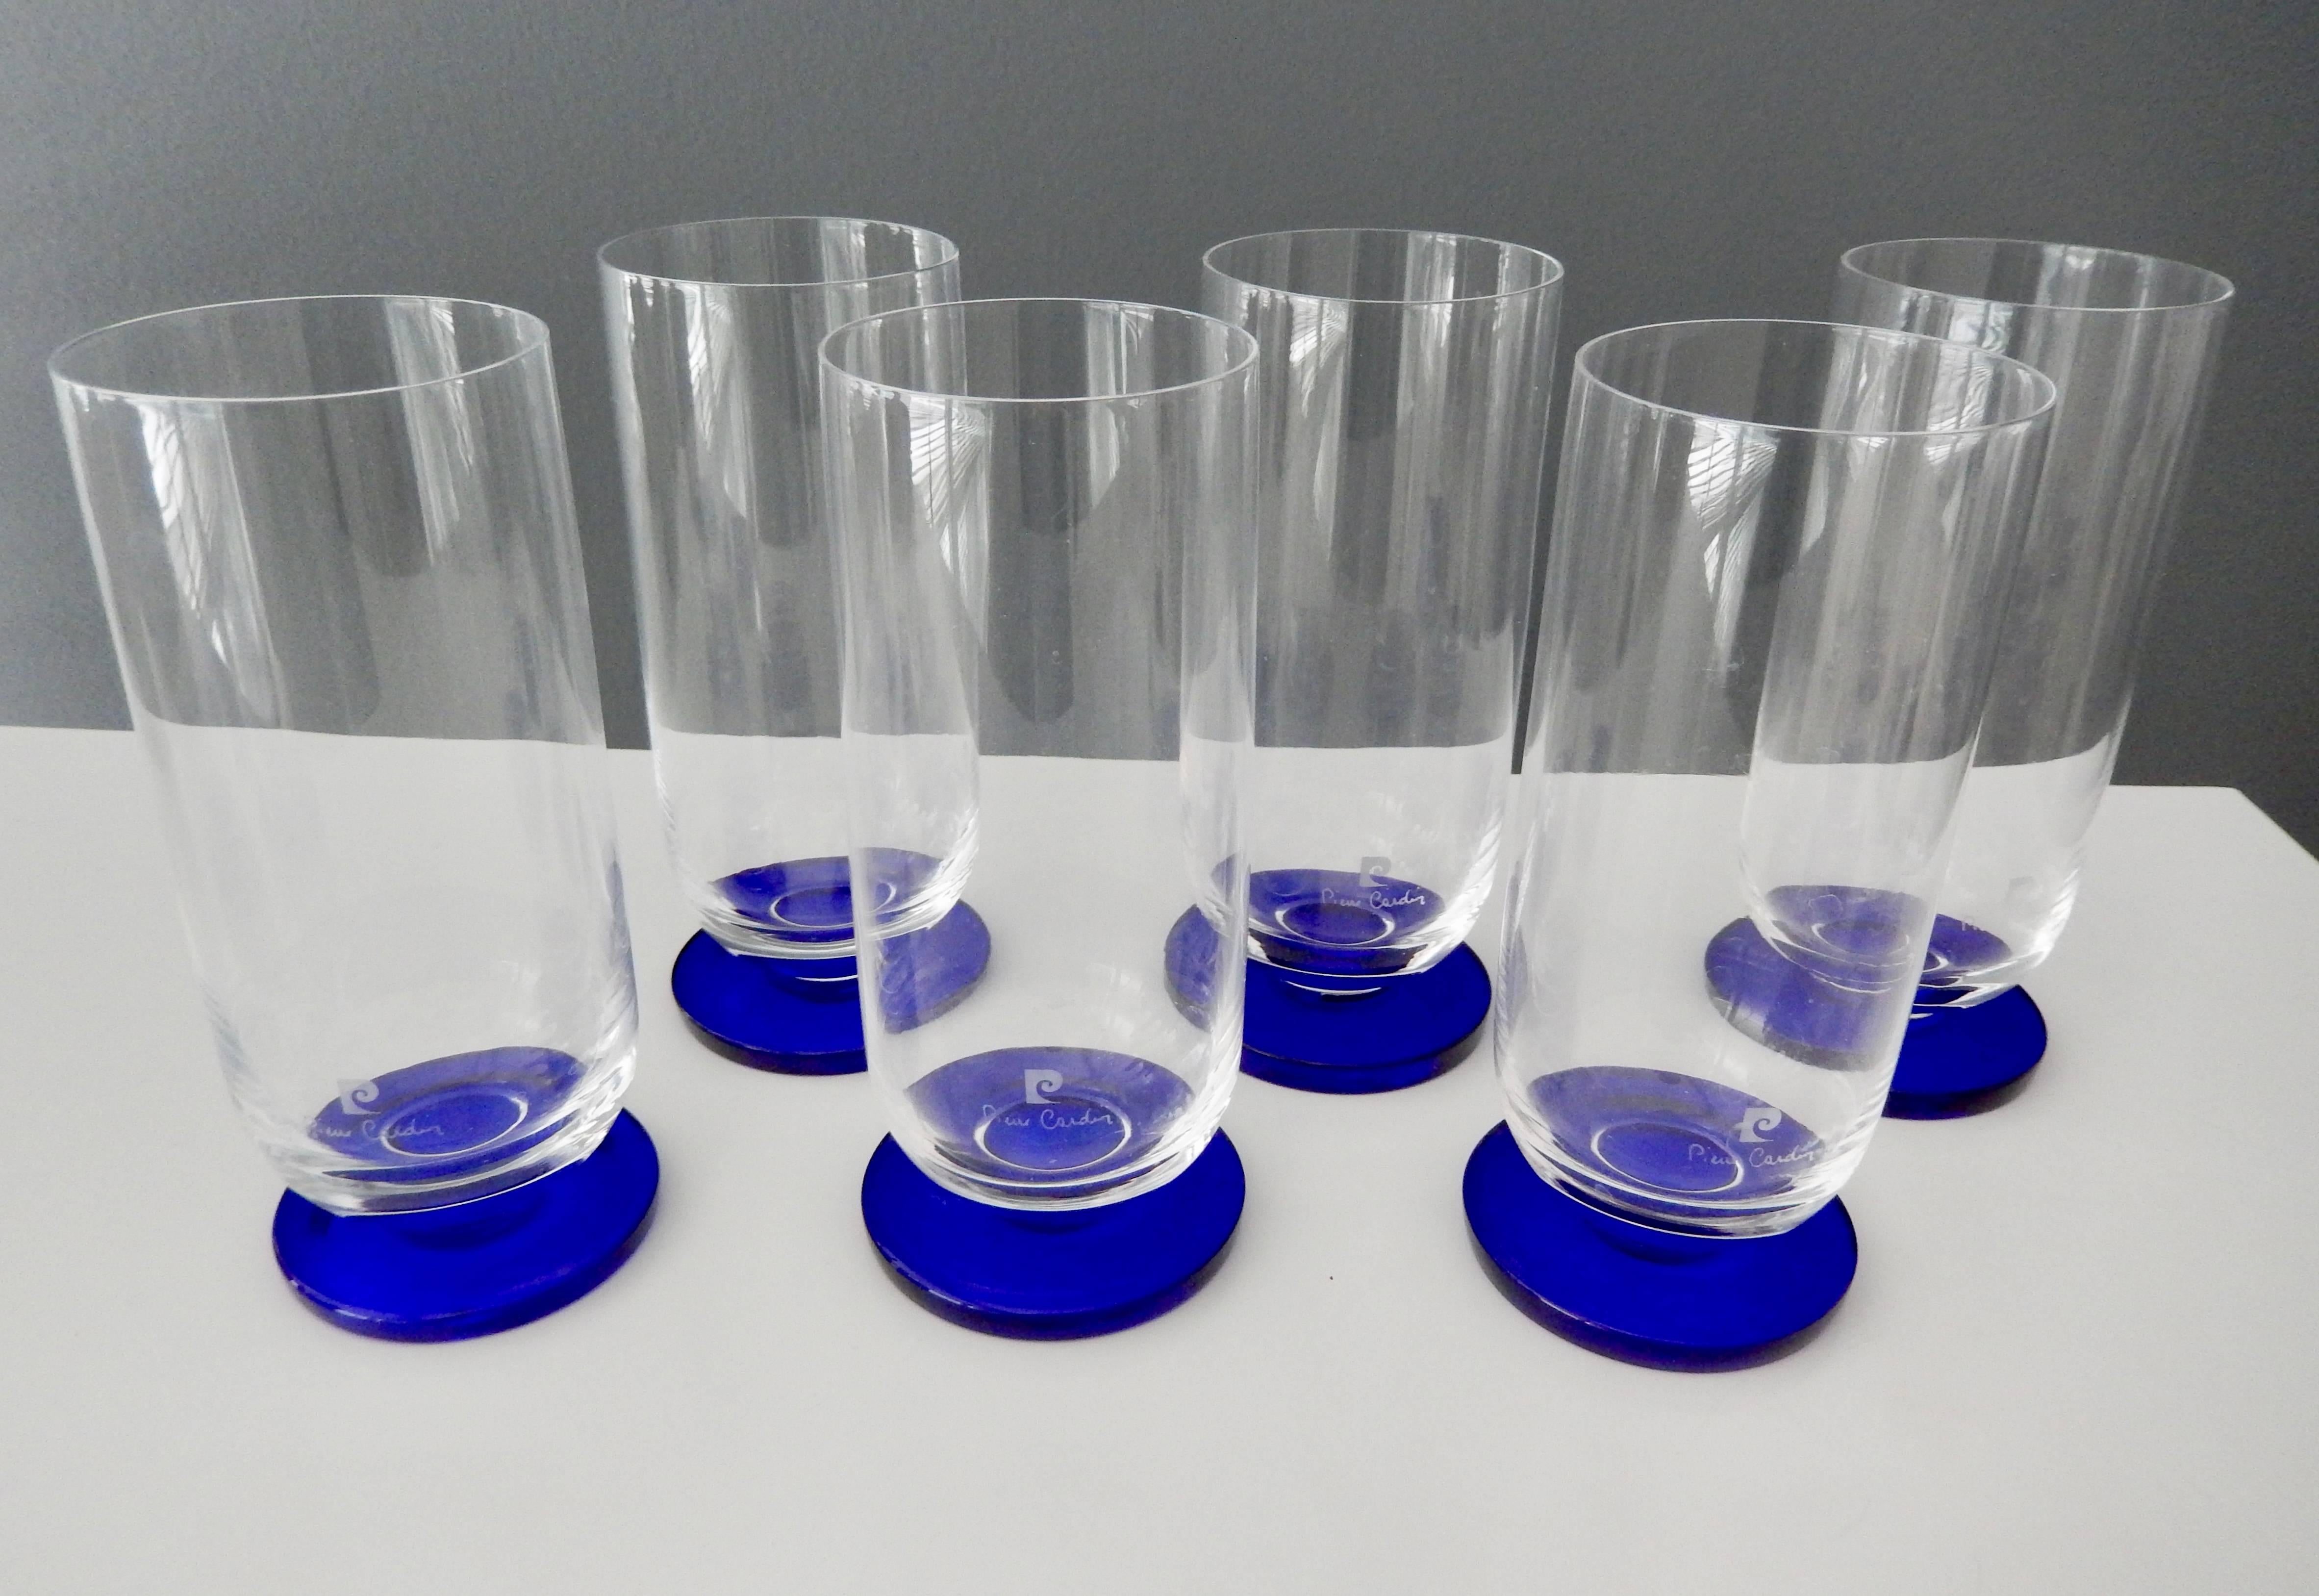 A rare set of six glass tumblers by Pierre Cardin. The combination of clear and French blue glass is striking. Etched signature and logo. 

Reference: See p. 193 in Pierre Cardin Evolution by Benjamin Loyaute for a similar glass design.